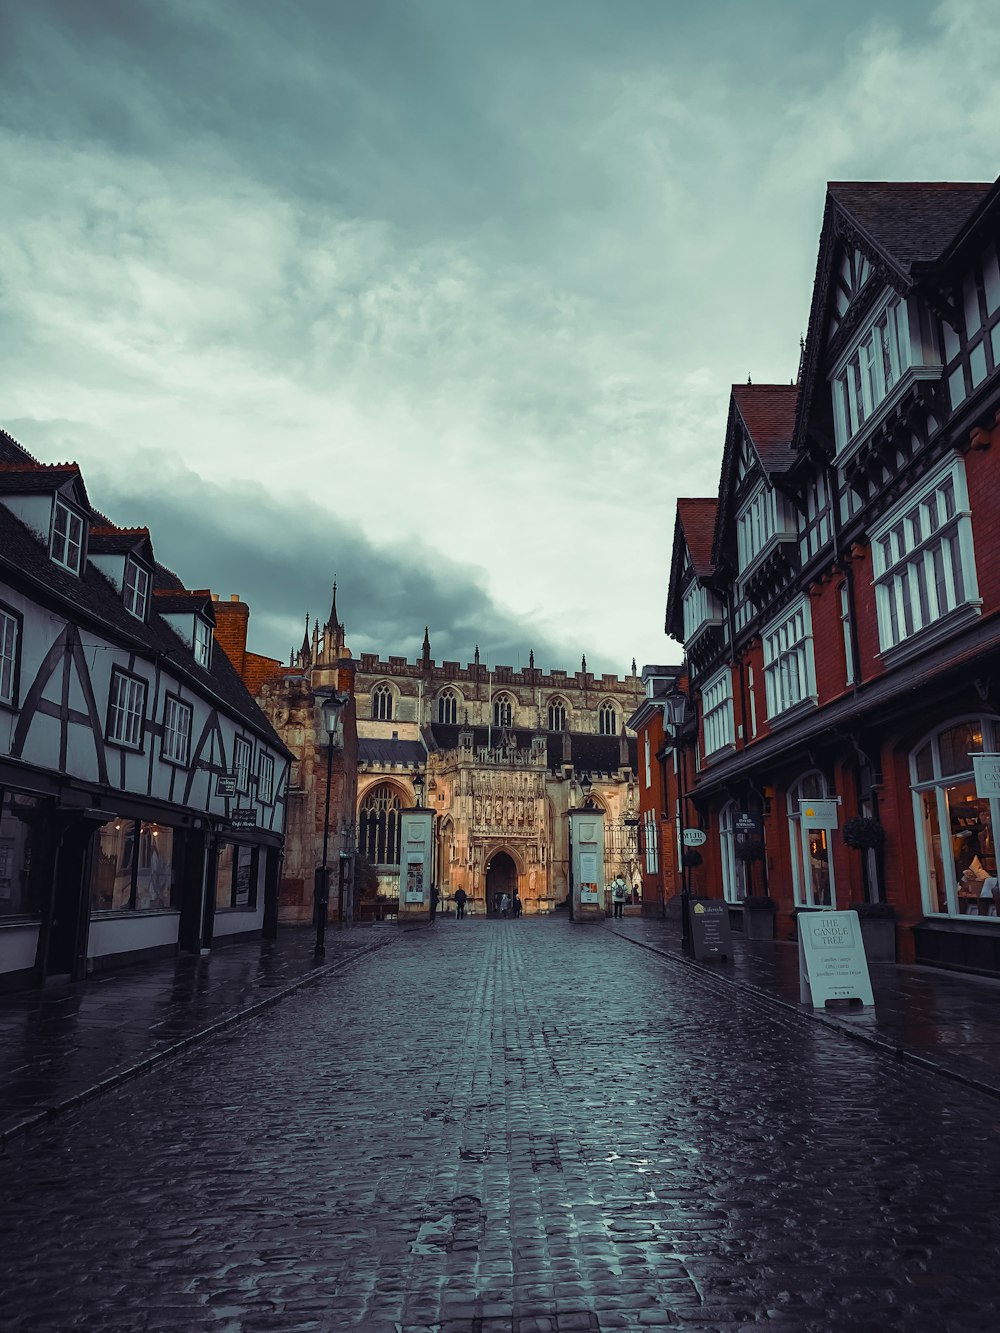 a cobblestone street lined with buildings under a cloudy sky